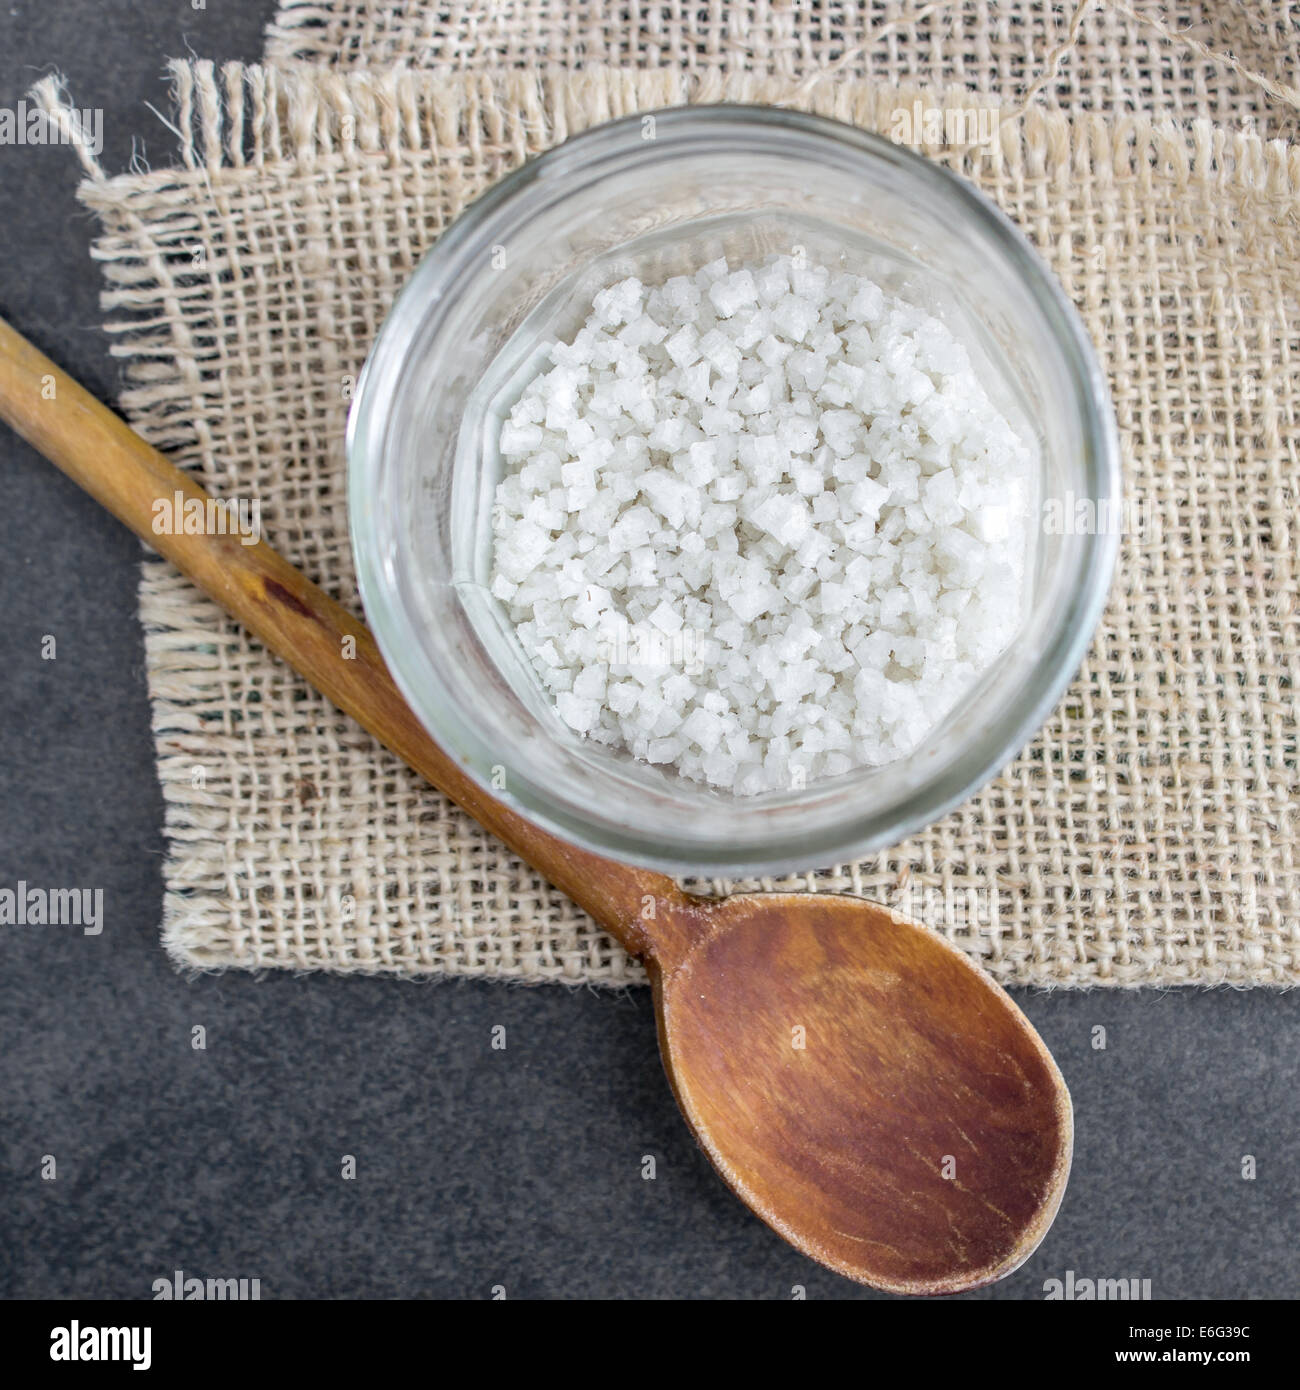 White rock salt in glass jar on table, from above Stock Photo